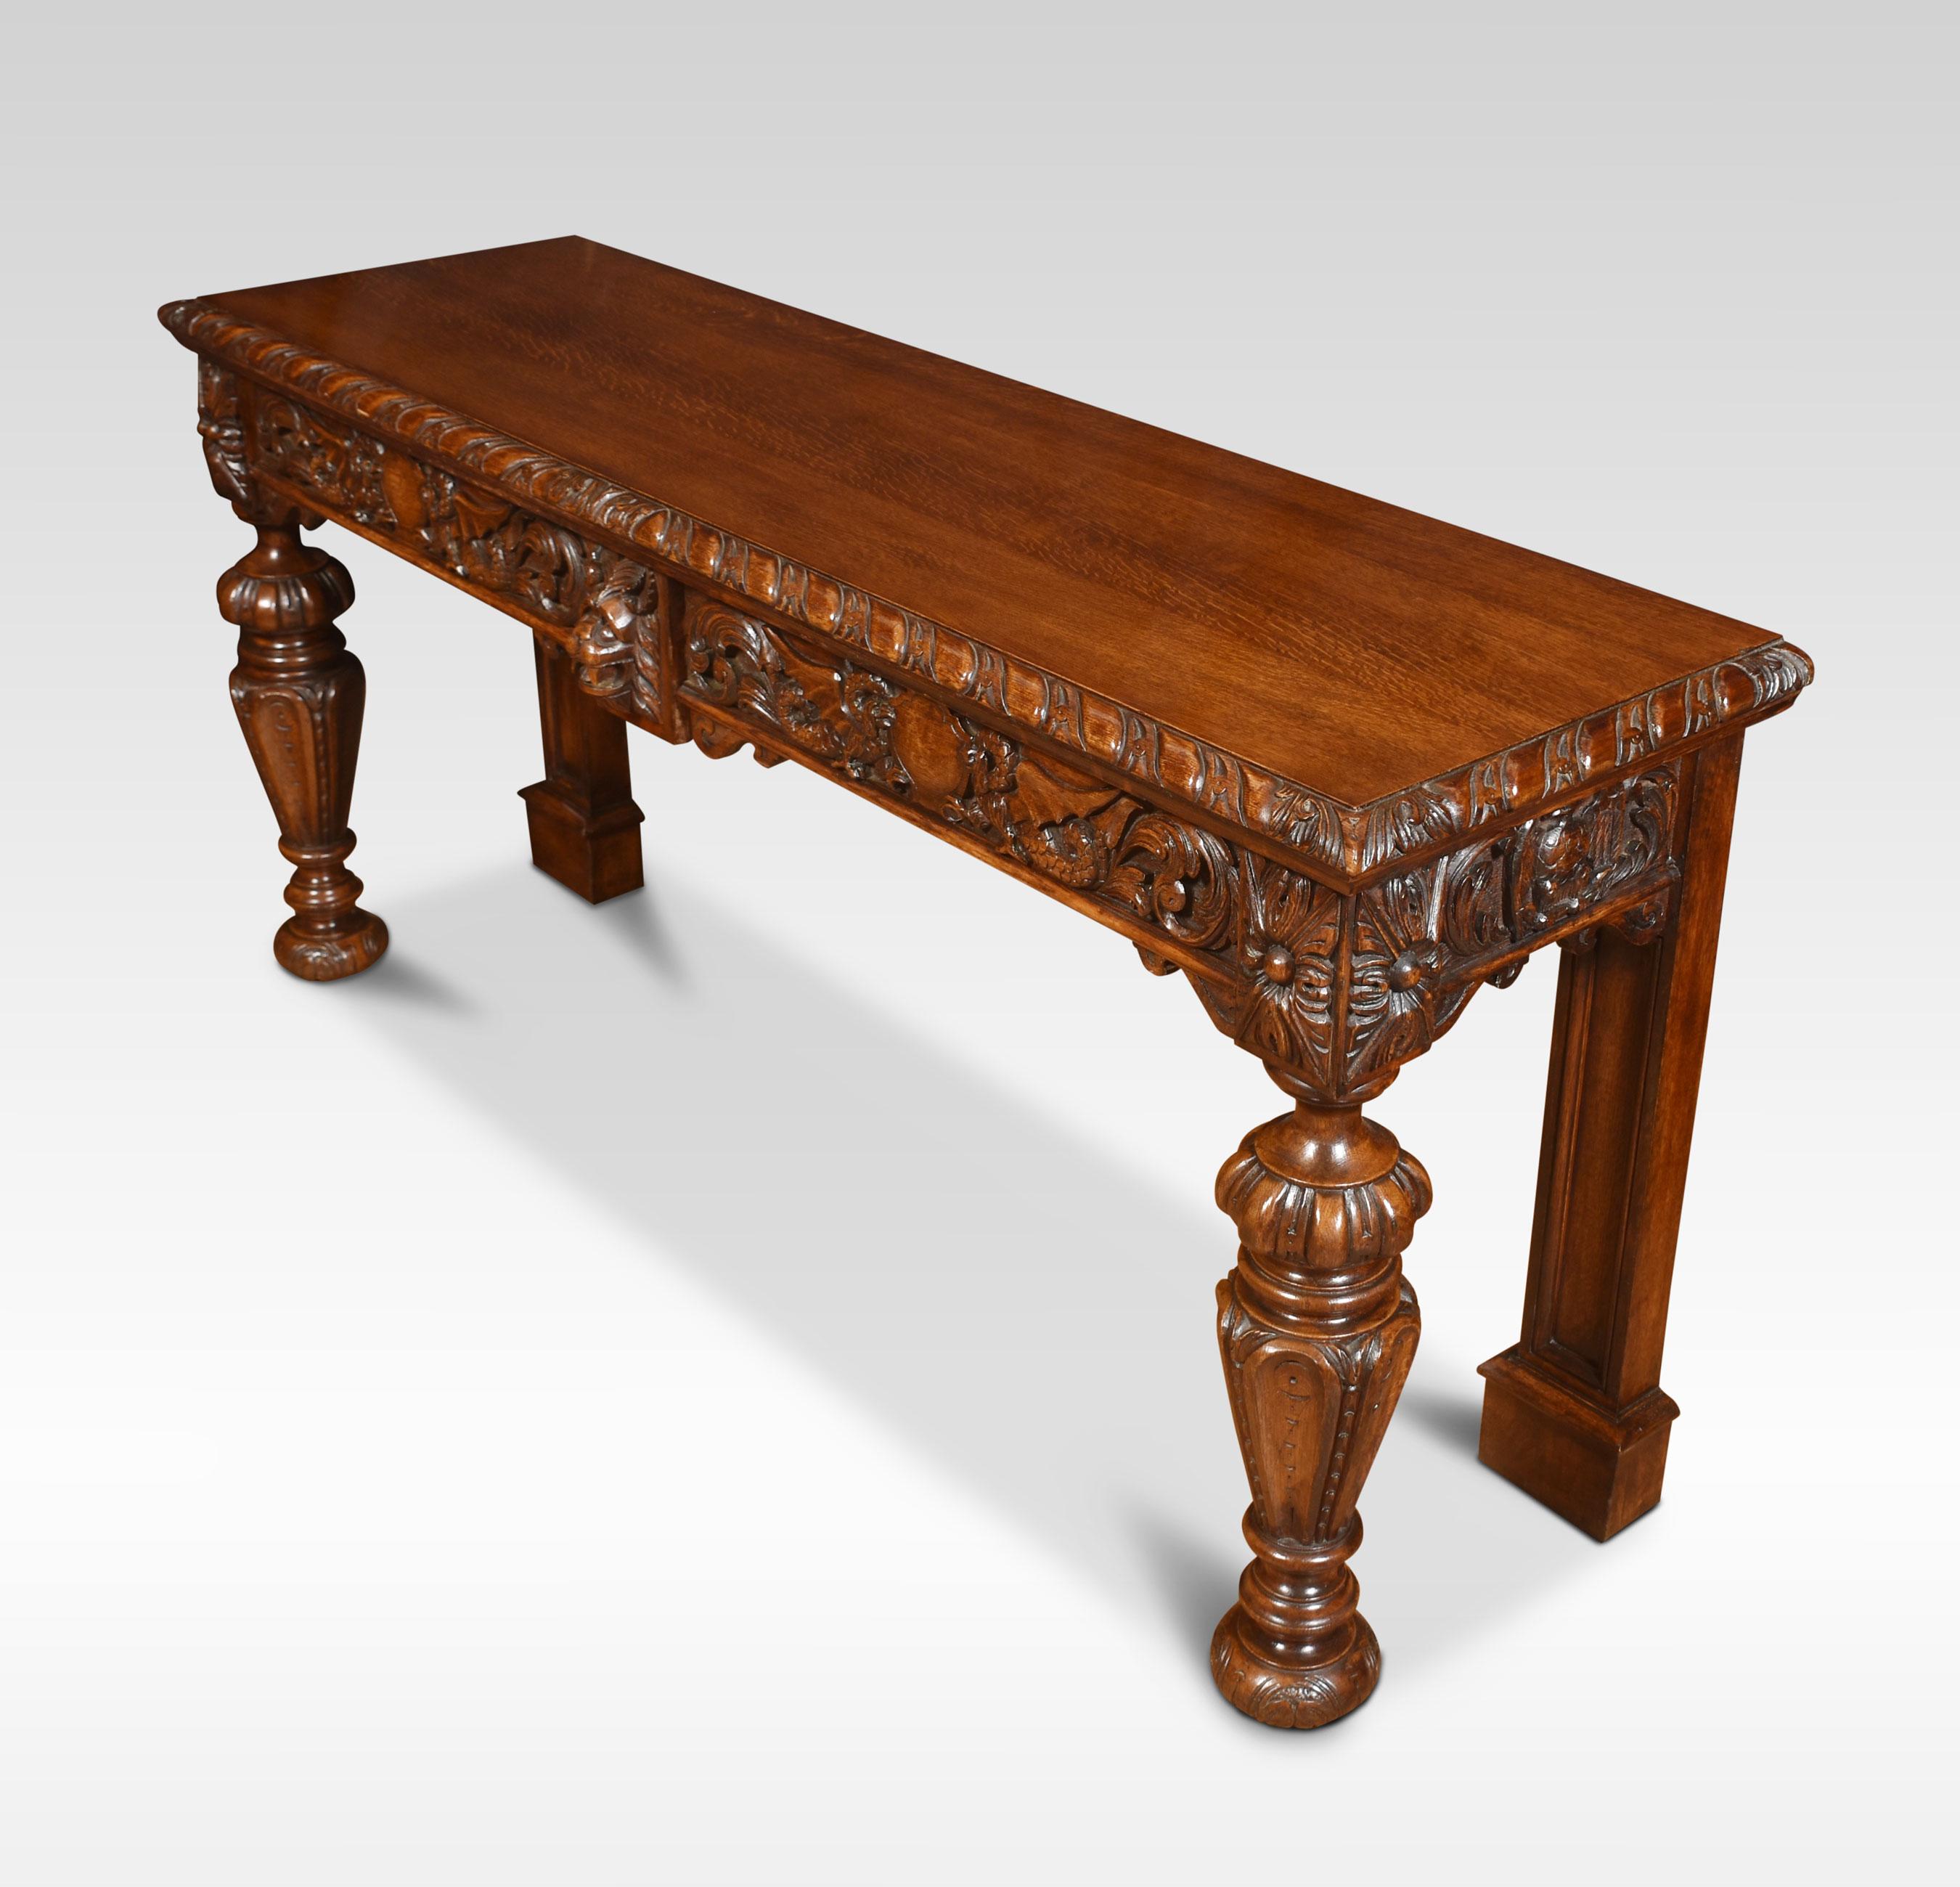 Carved oak console/serving table, the rectangular top with molded edge above two freeze drawers carved with dragons and foliated scrolling relief. All raised up on vase-shaped front supports terminating in carved bun feet.
Dimensions
Height 33.5